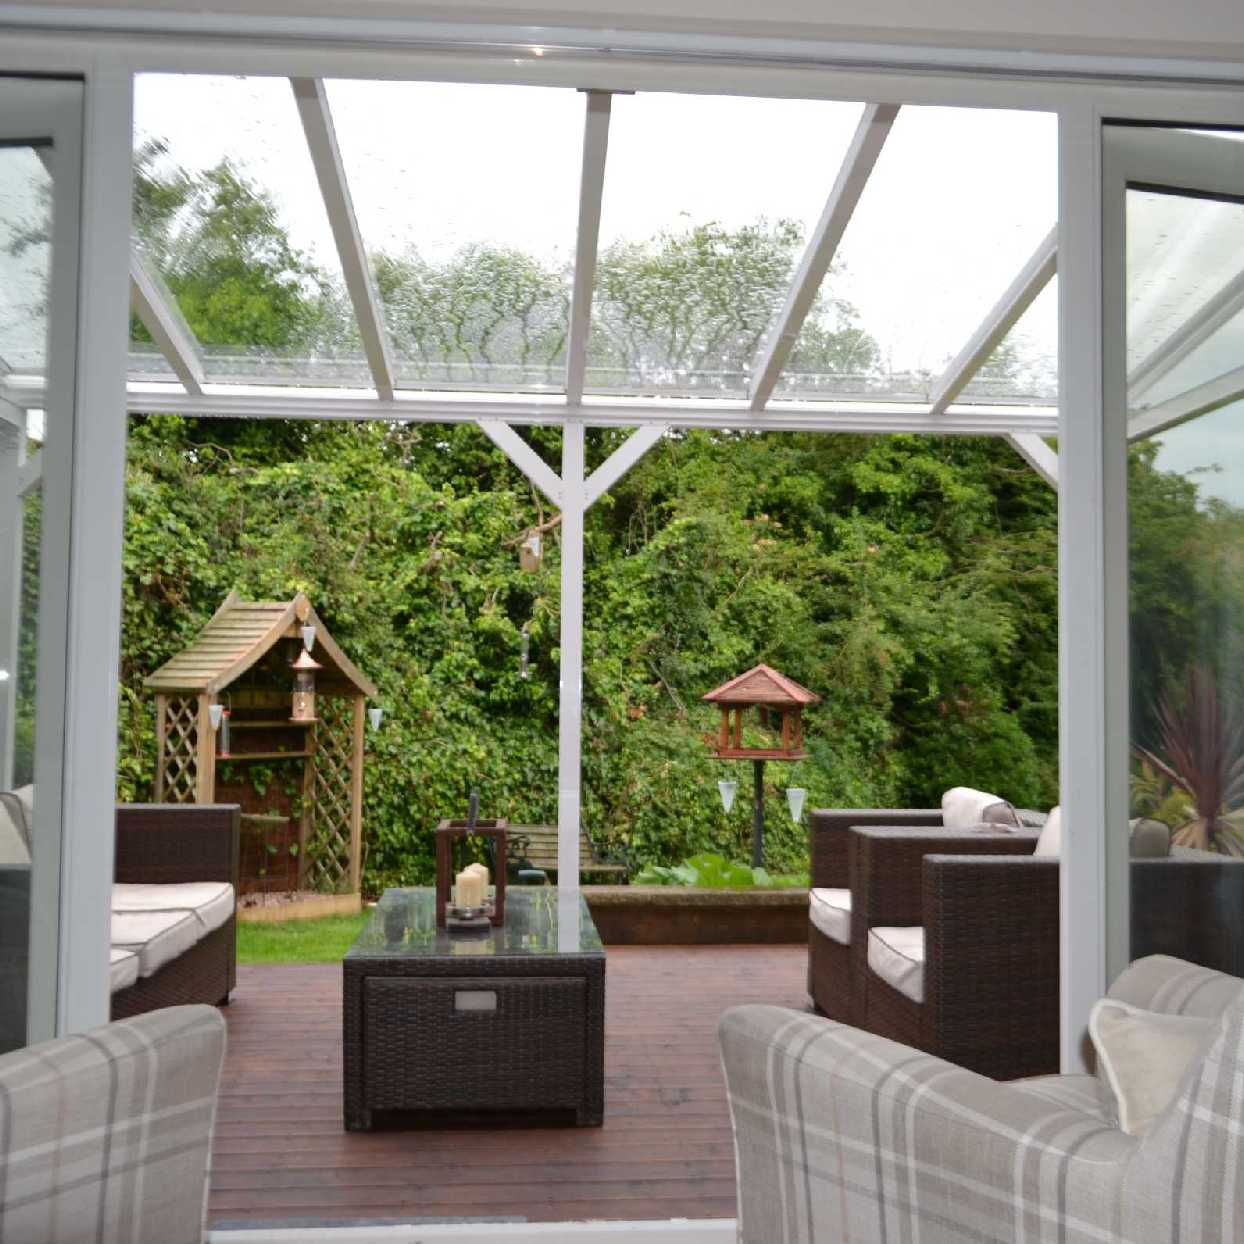 Buy Omega Smart Free-Standing, White MonoPitch Roof Canopy with 6mm Glass Clear Plate Polycarbonate Glazing - 6.3m (W) x 3.0m (P), (8) Supporting Posts online today